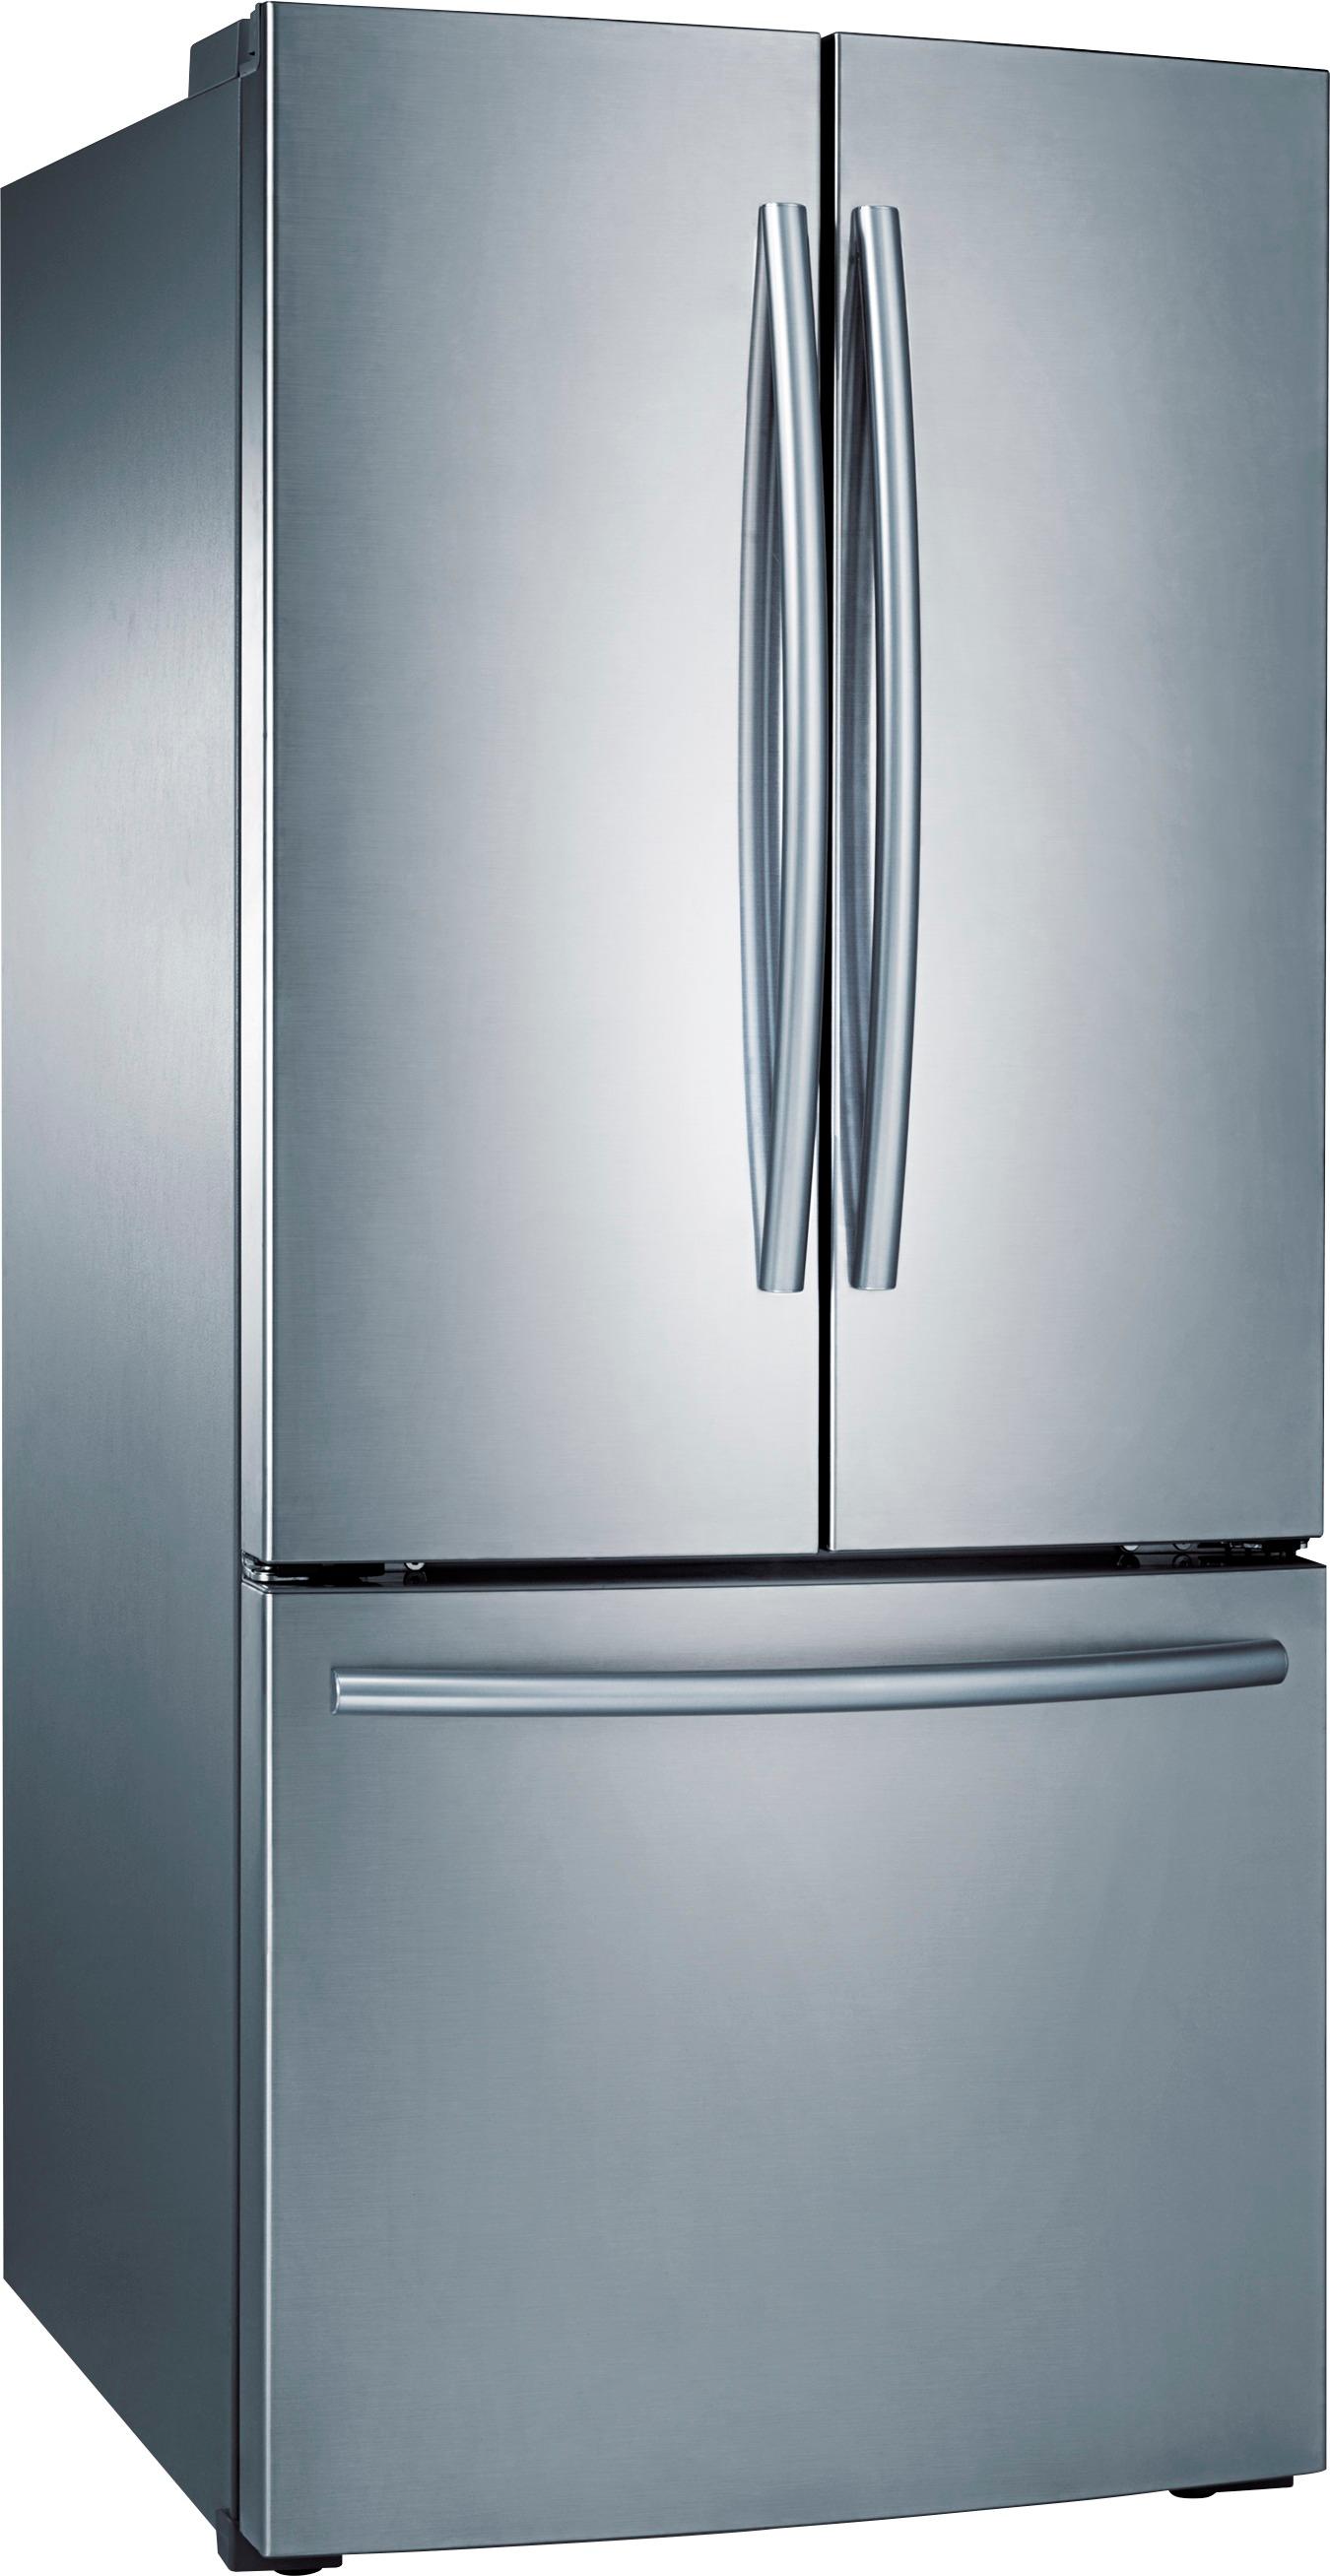 Angle View: Samsung - 21.8 Cu. Ft. French-Door Refrigerator - Stainless steel